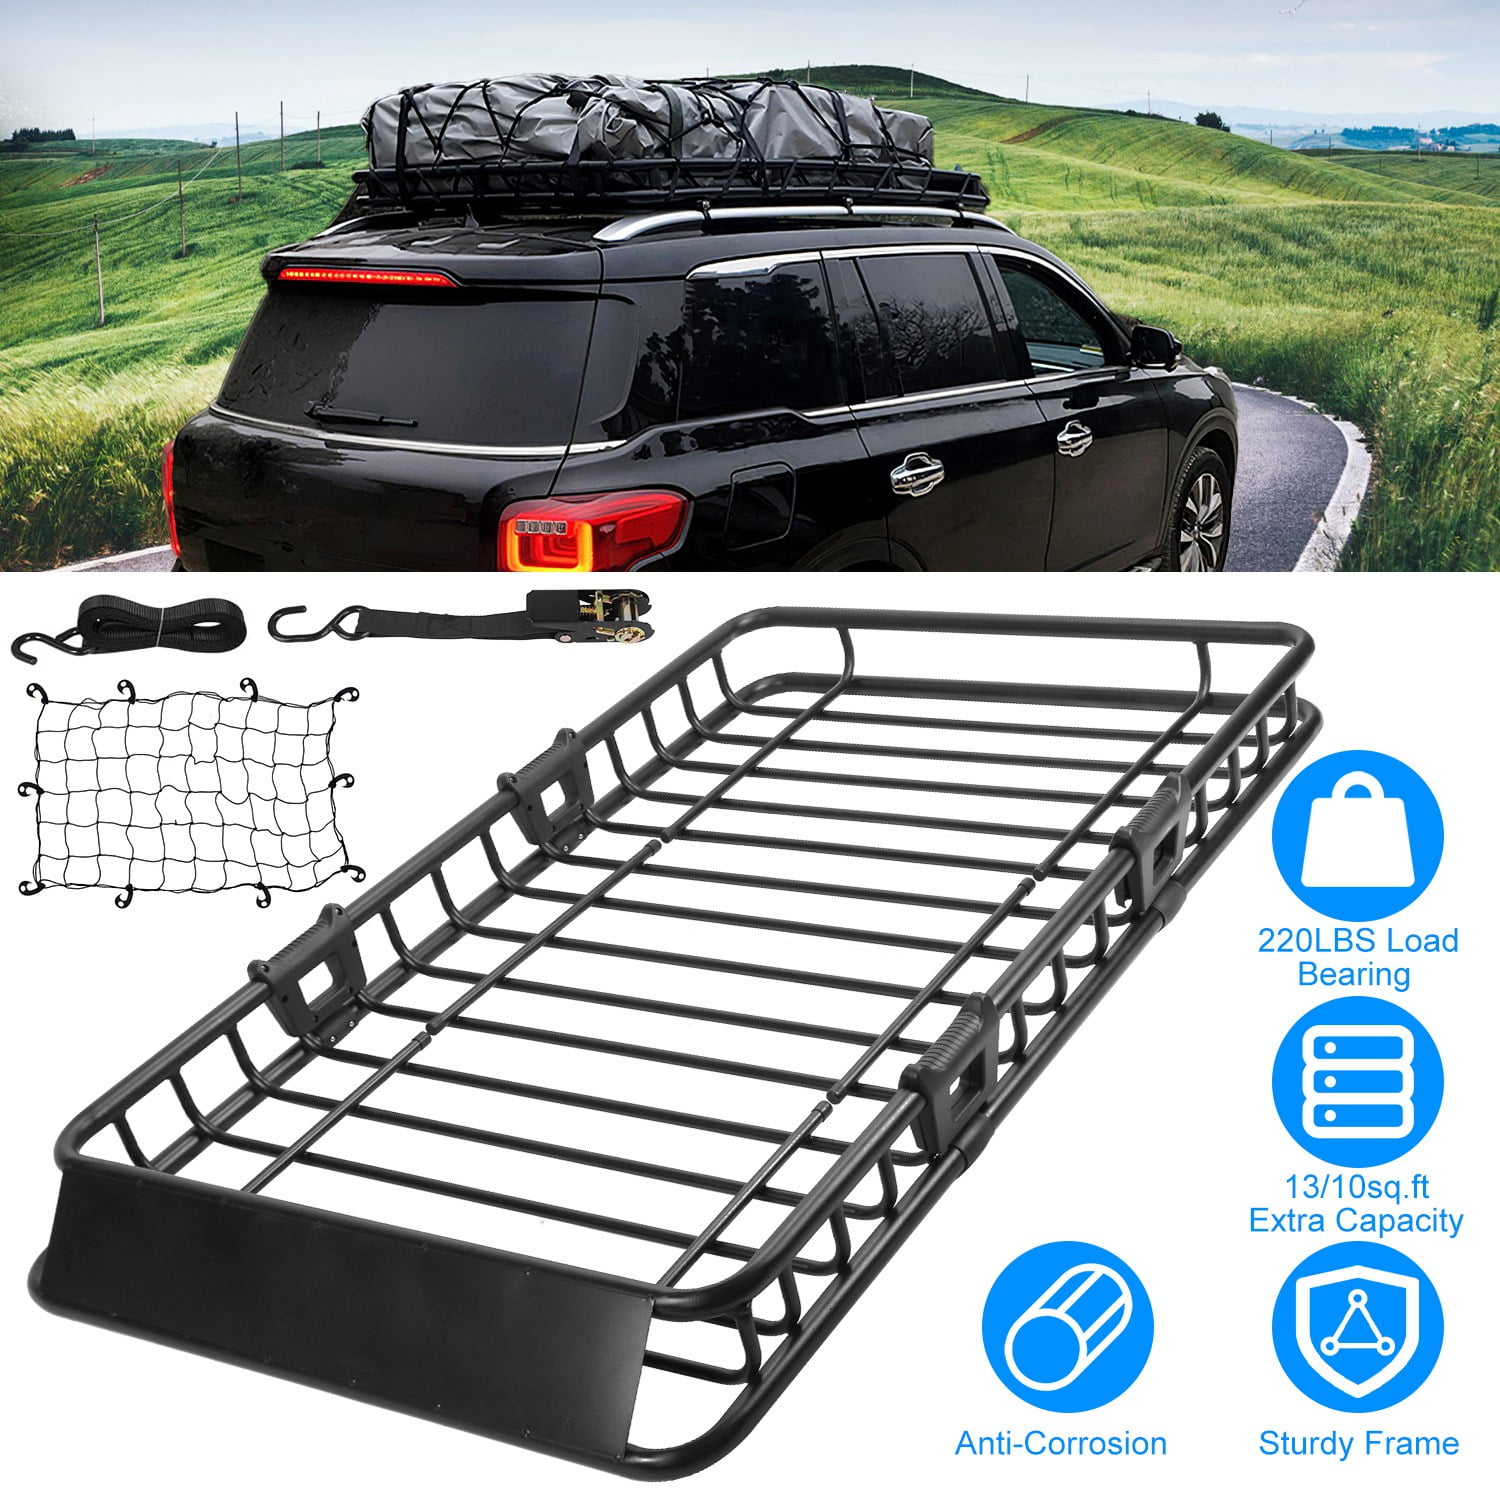 iMounTEK 64 Universal Roof Rack Cargo Carrier Extension Car Top Luggage  Basket Black Holder with Net and Hook 